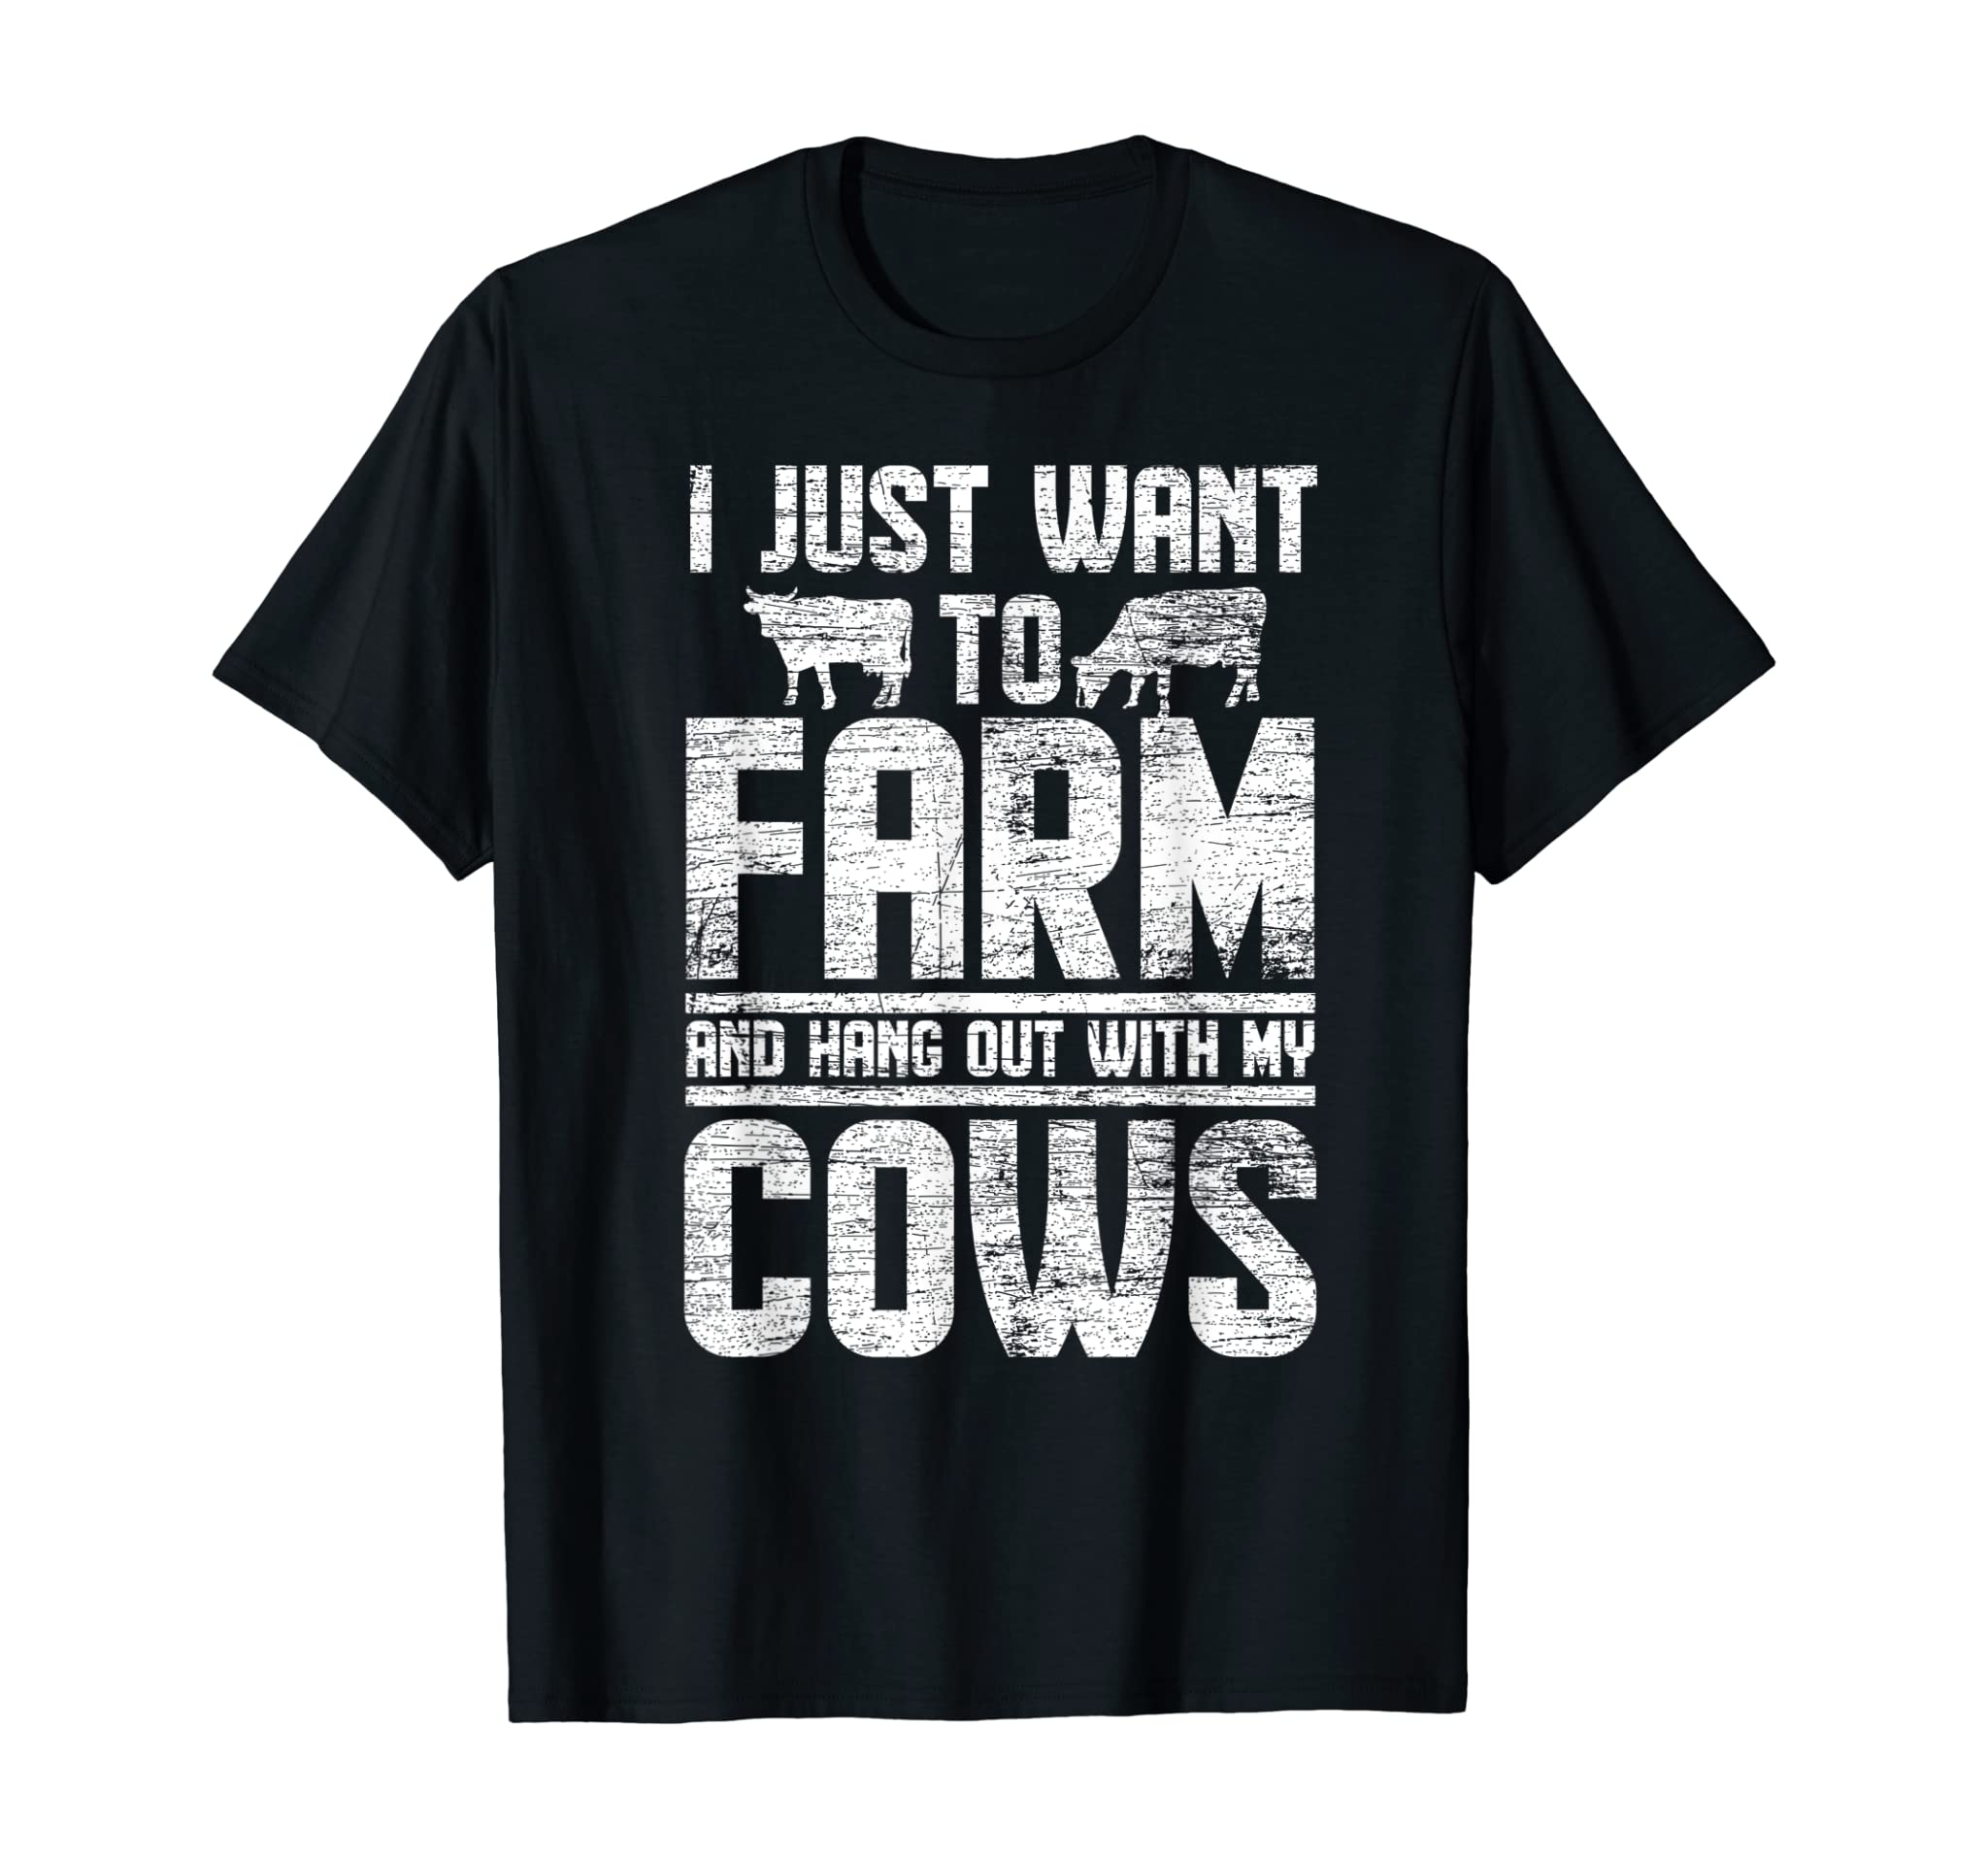 I Just Want To Farm And Hang Out With My Cows Cow T-Shirt